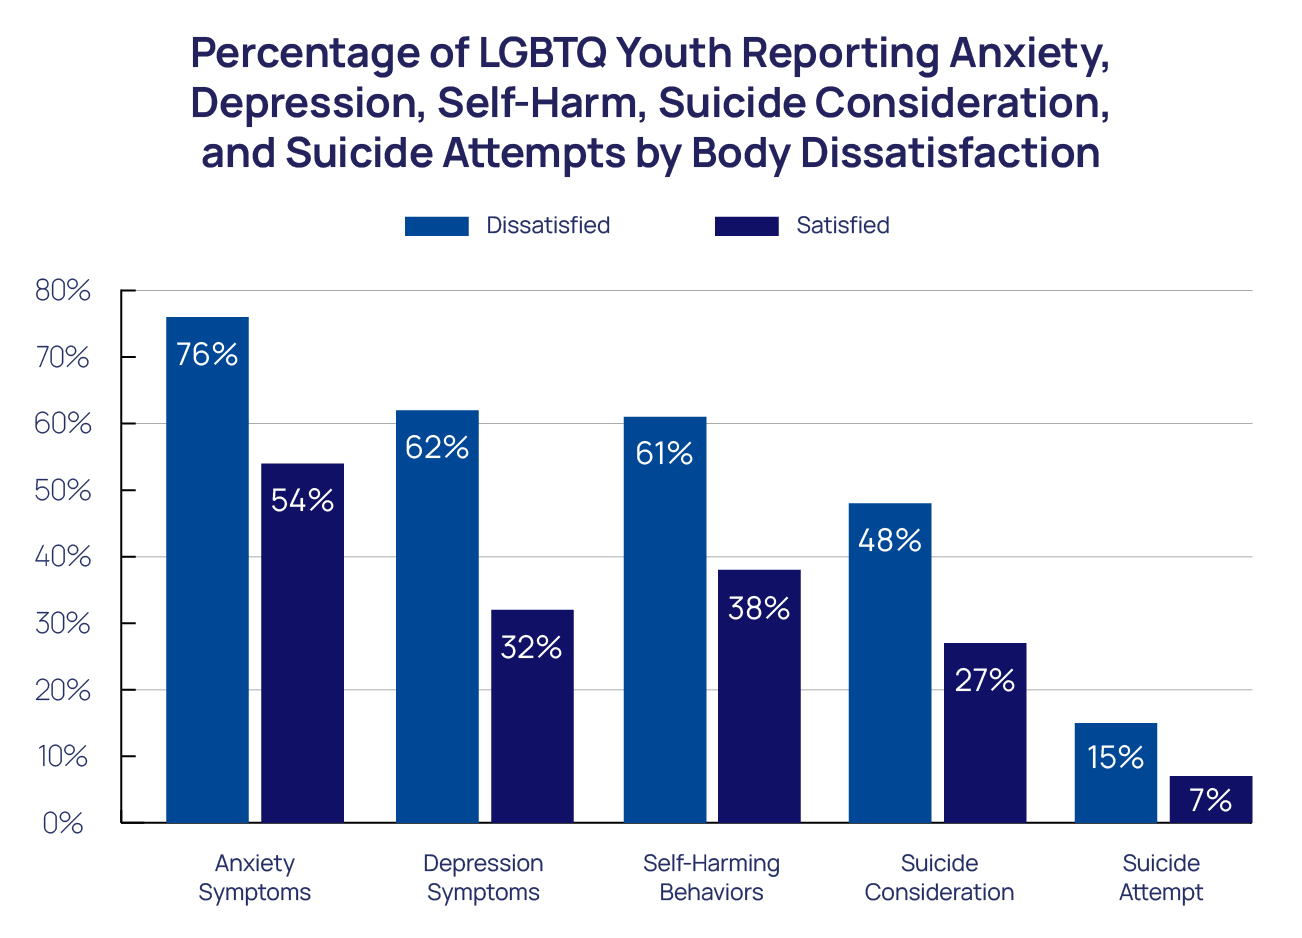 Percentage of LGBTQ Youth Reporting Anxiety, Depression, Self-Harm, Suicide Consideration, and Suicide Attempts by Body Dissatisfaction bar chart